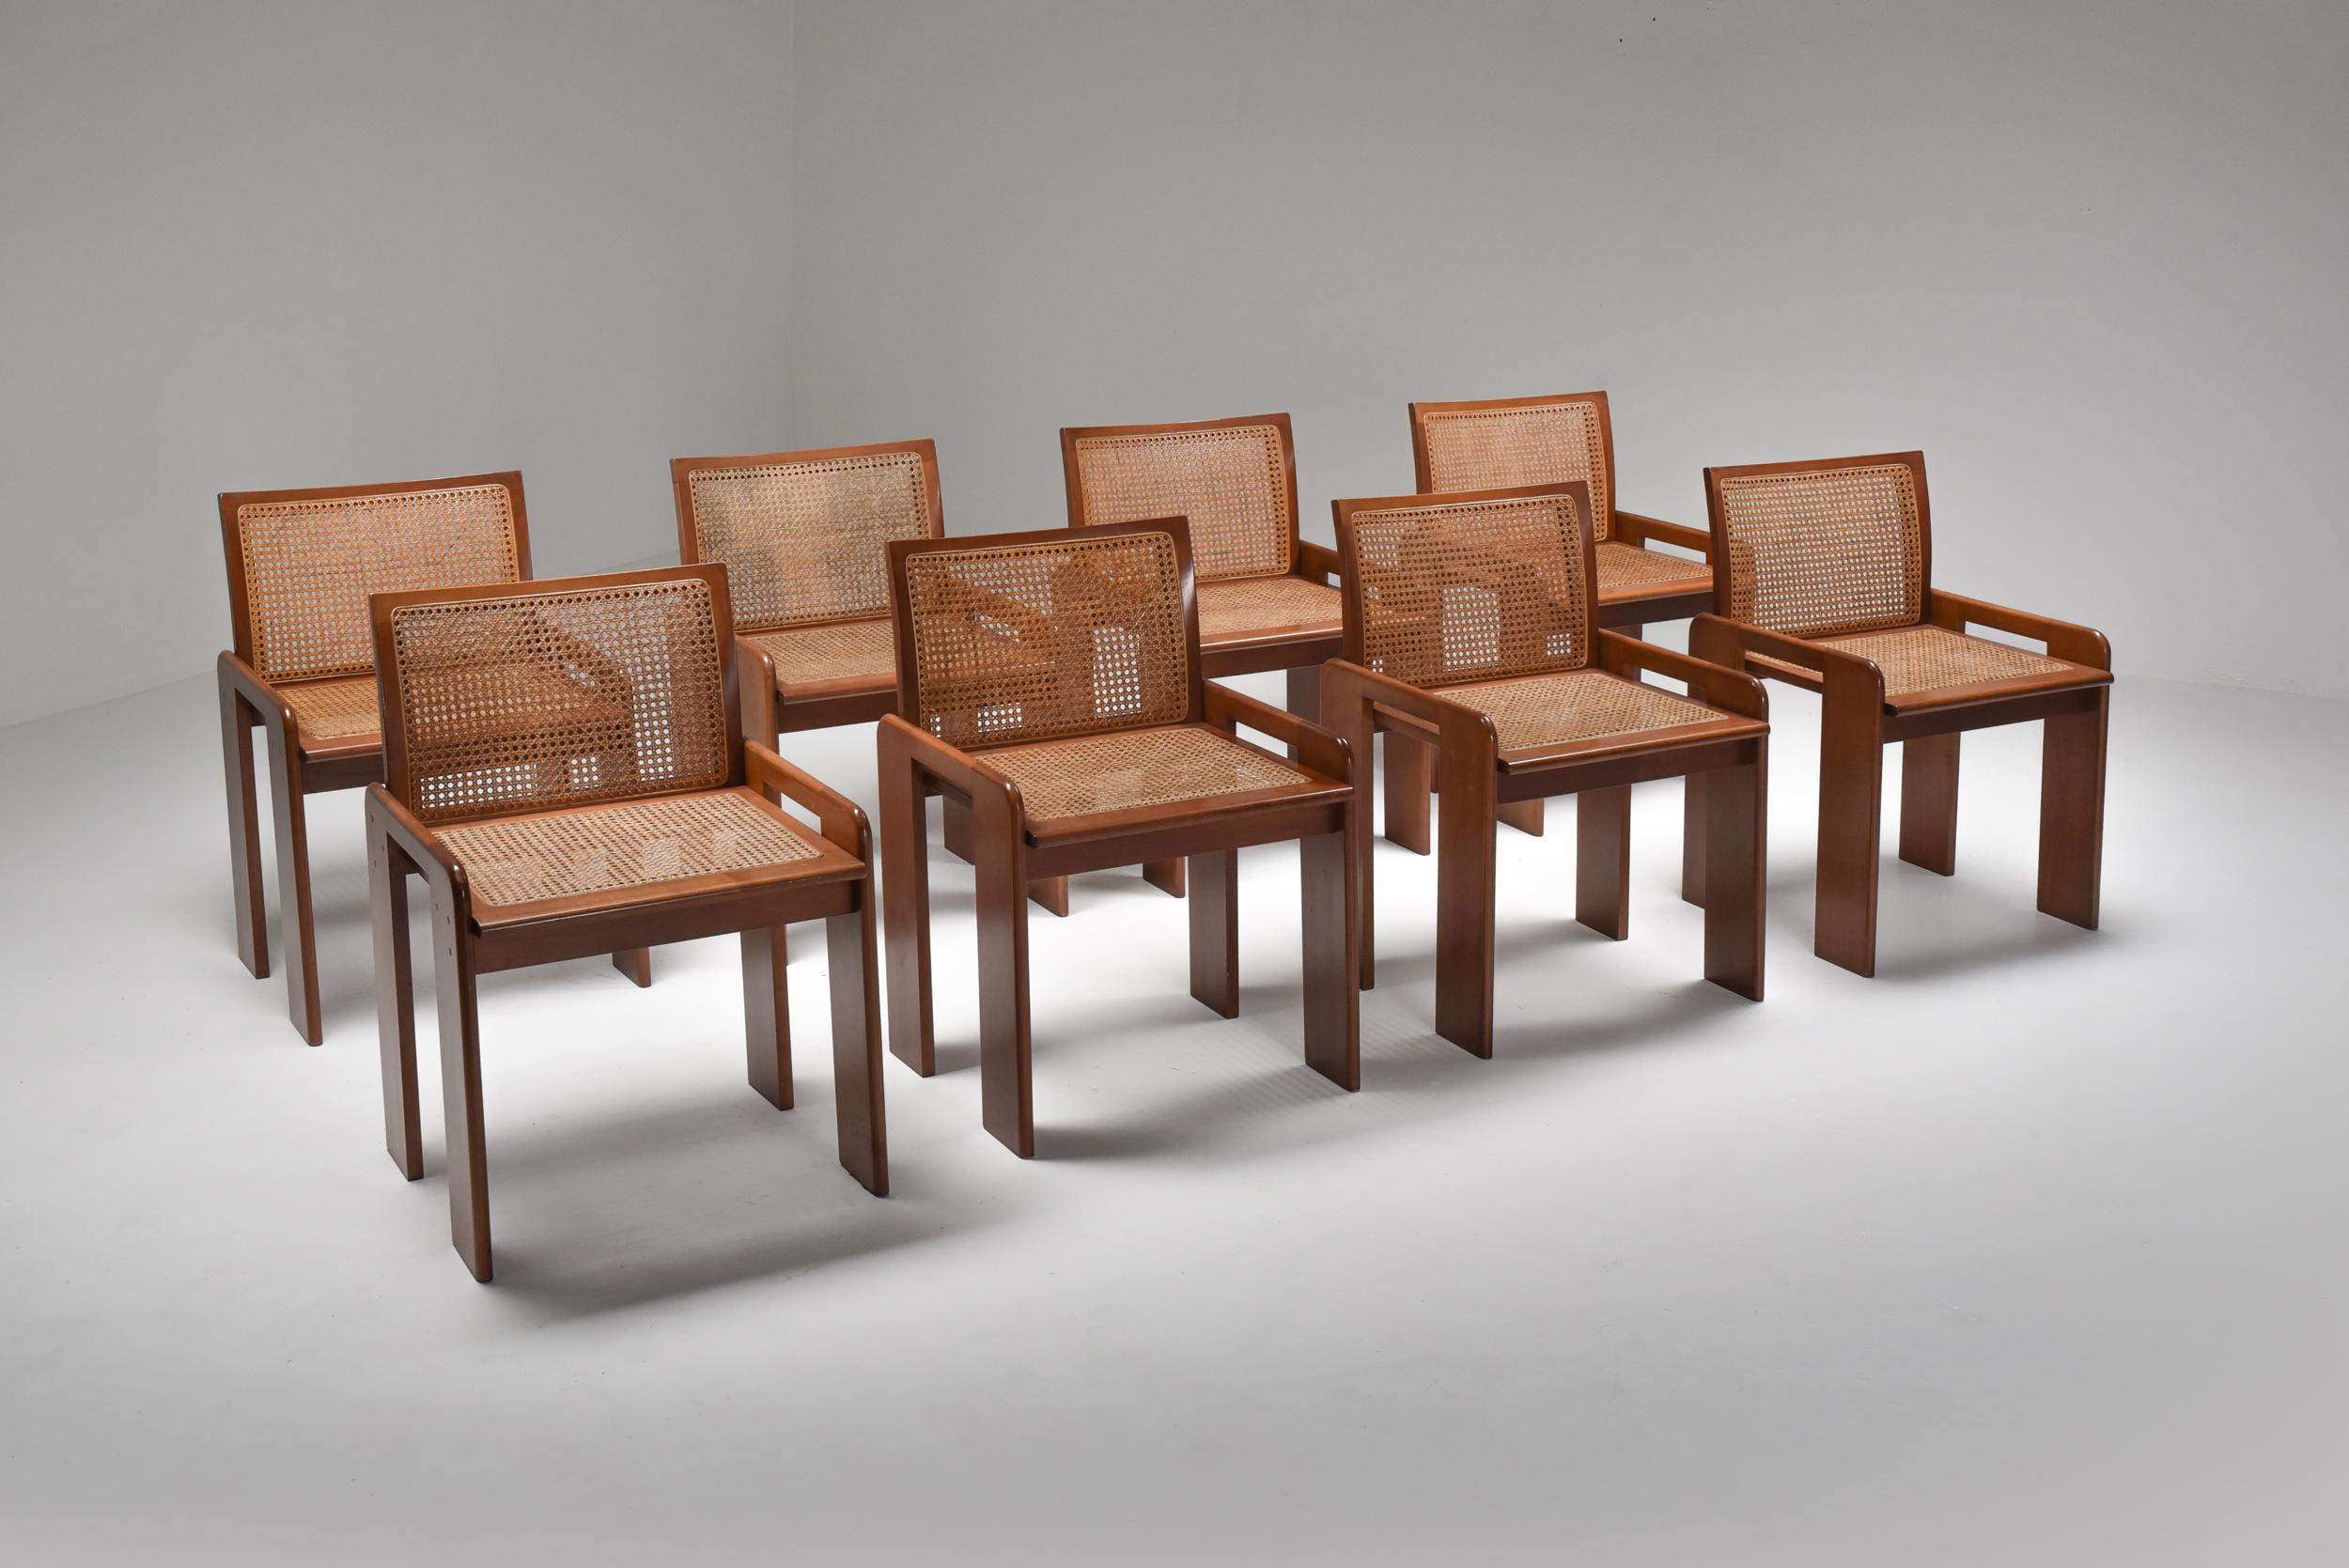 Italian dining chairs, attributed to Afra & Tobia Scarpa, Mid-Century Modern, 1970s

Eight dining chairs designed and made in Italy
The nice combination of having a modern appearance combined with some more rustic elements as the cane seating